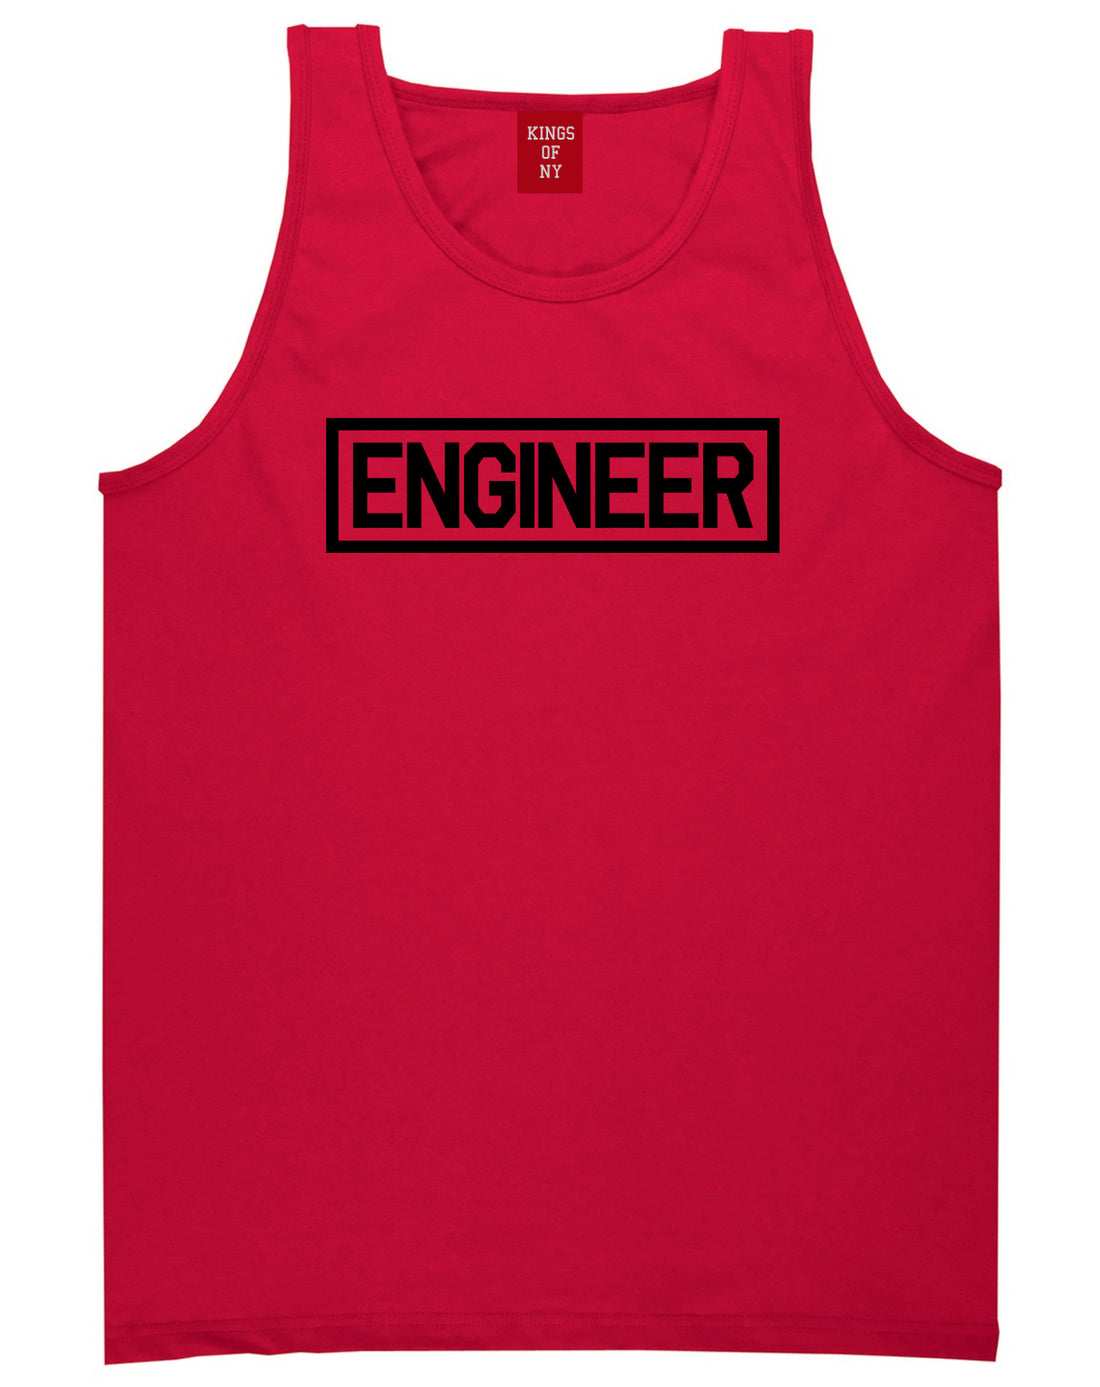 Engineer_Occupation_Job Mens Red Tank Top Shirt by Kings Of NY